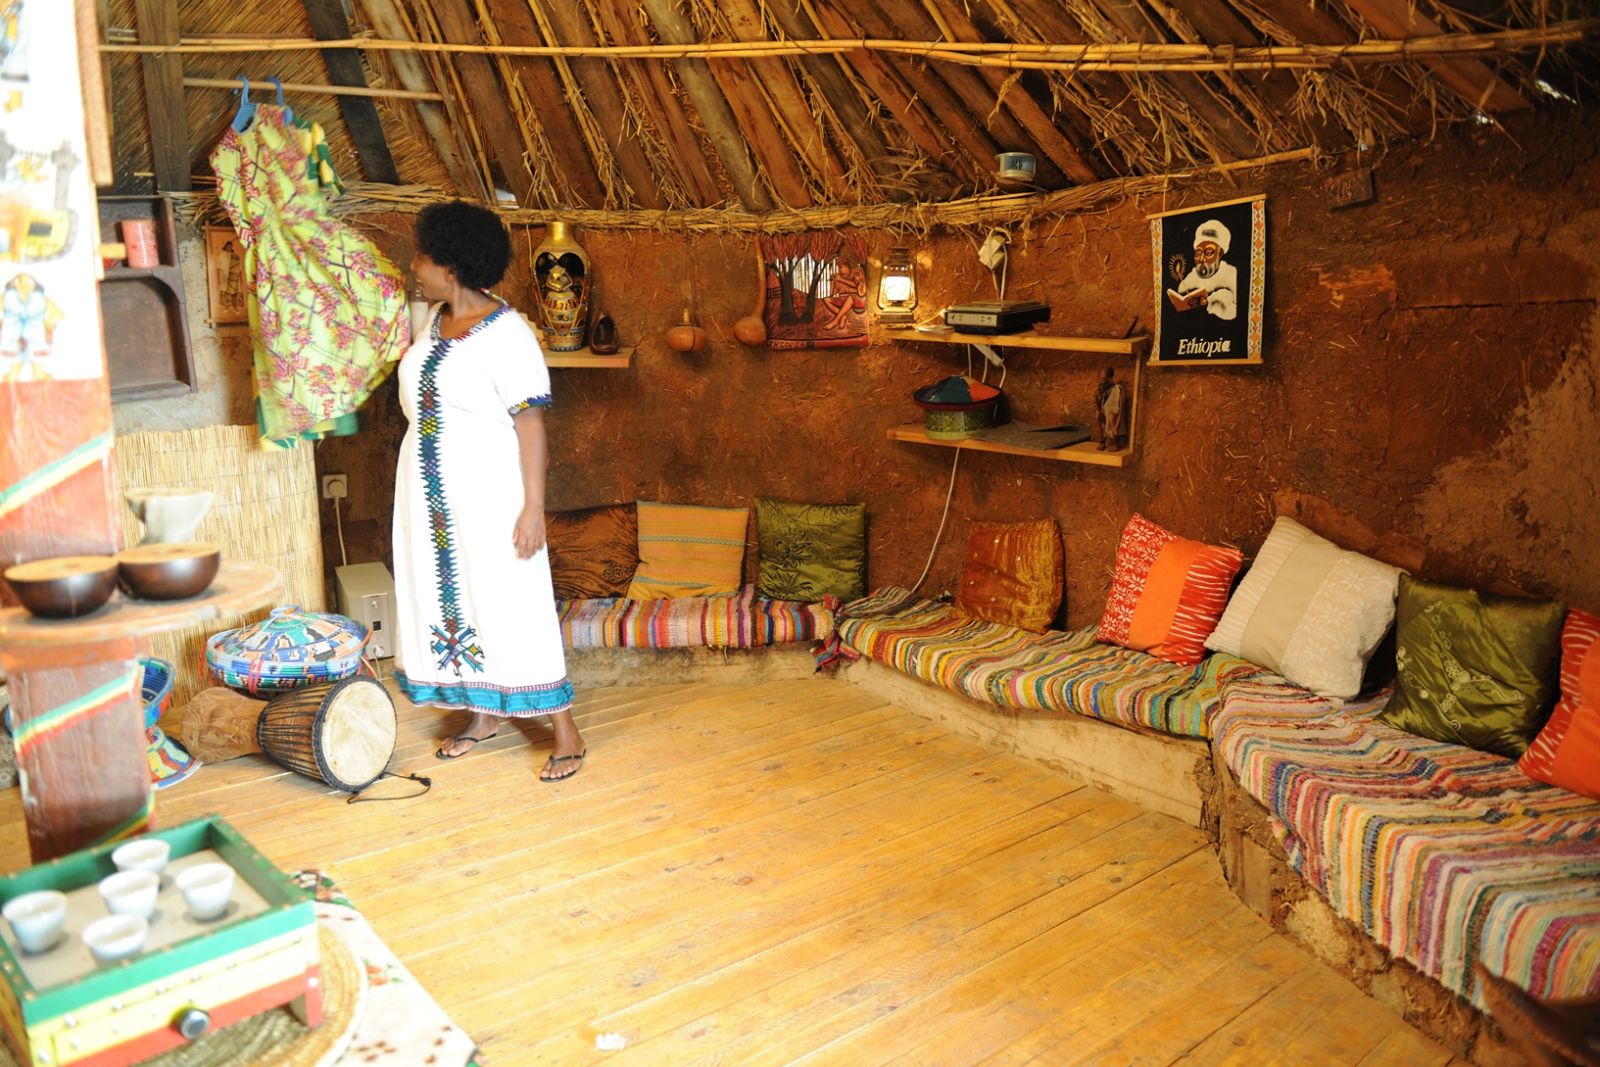 Yoney Skiba offers many hands-on activities in her recreated Ethiopian hut on Kibbutz Evron. Photo courtesy of Treasures of the Galilee